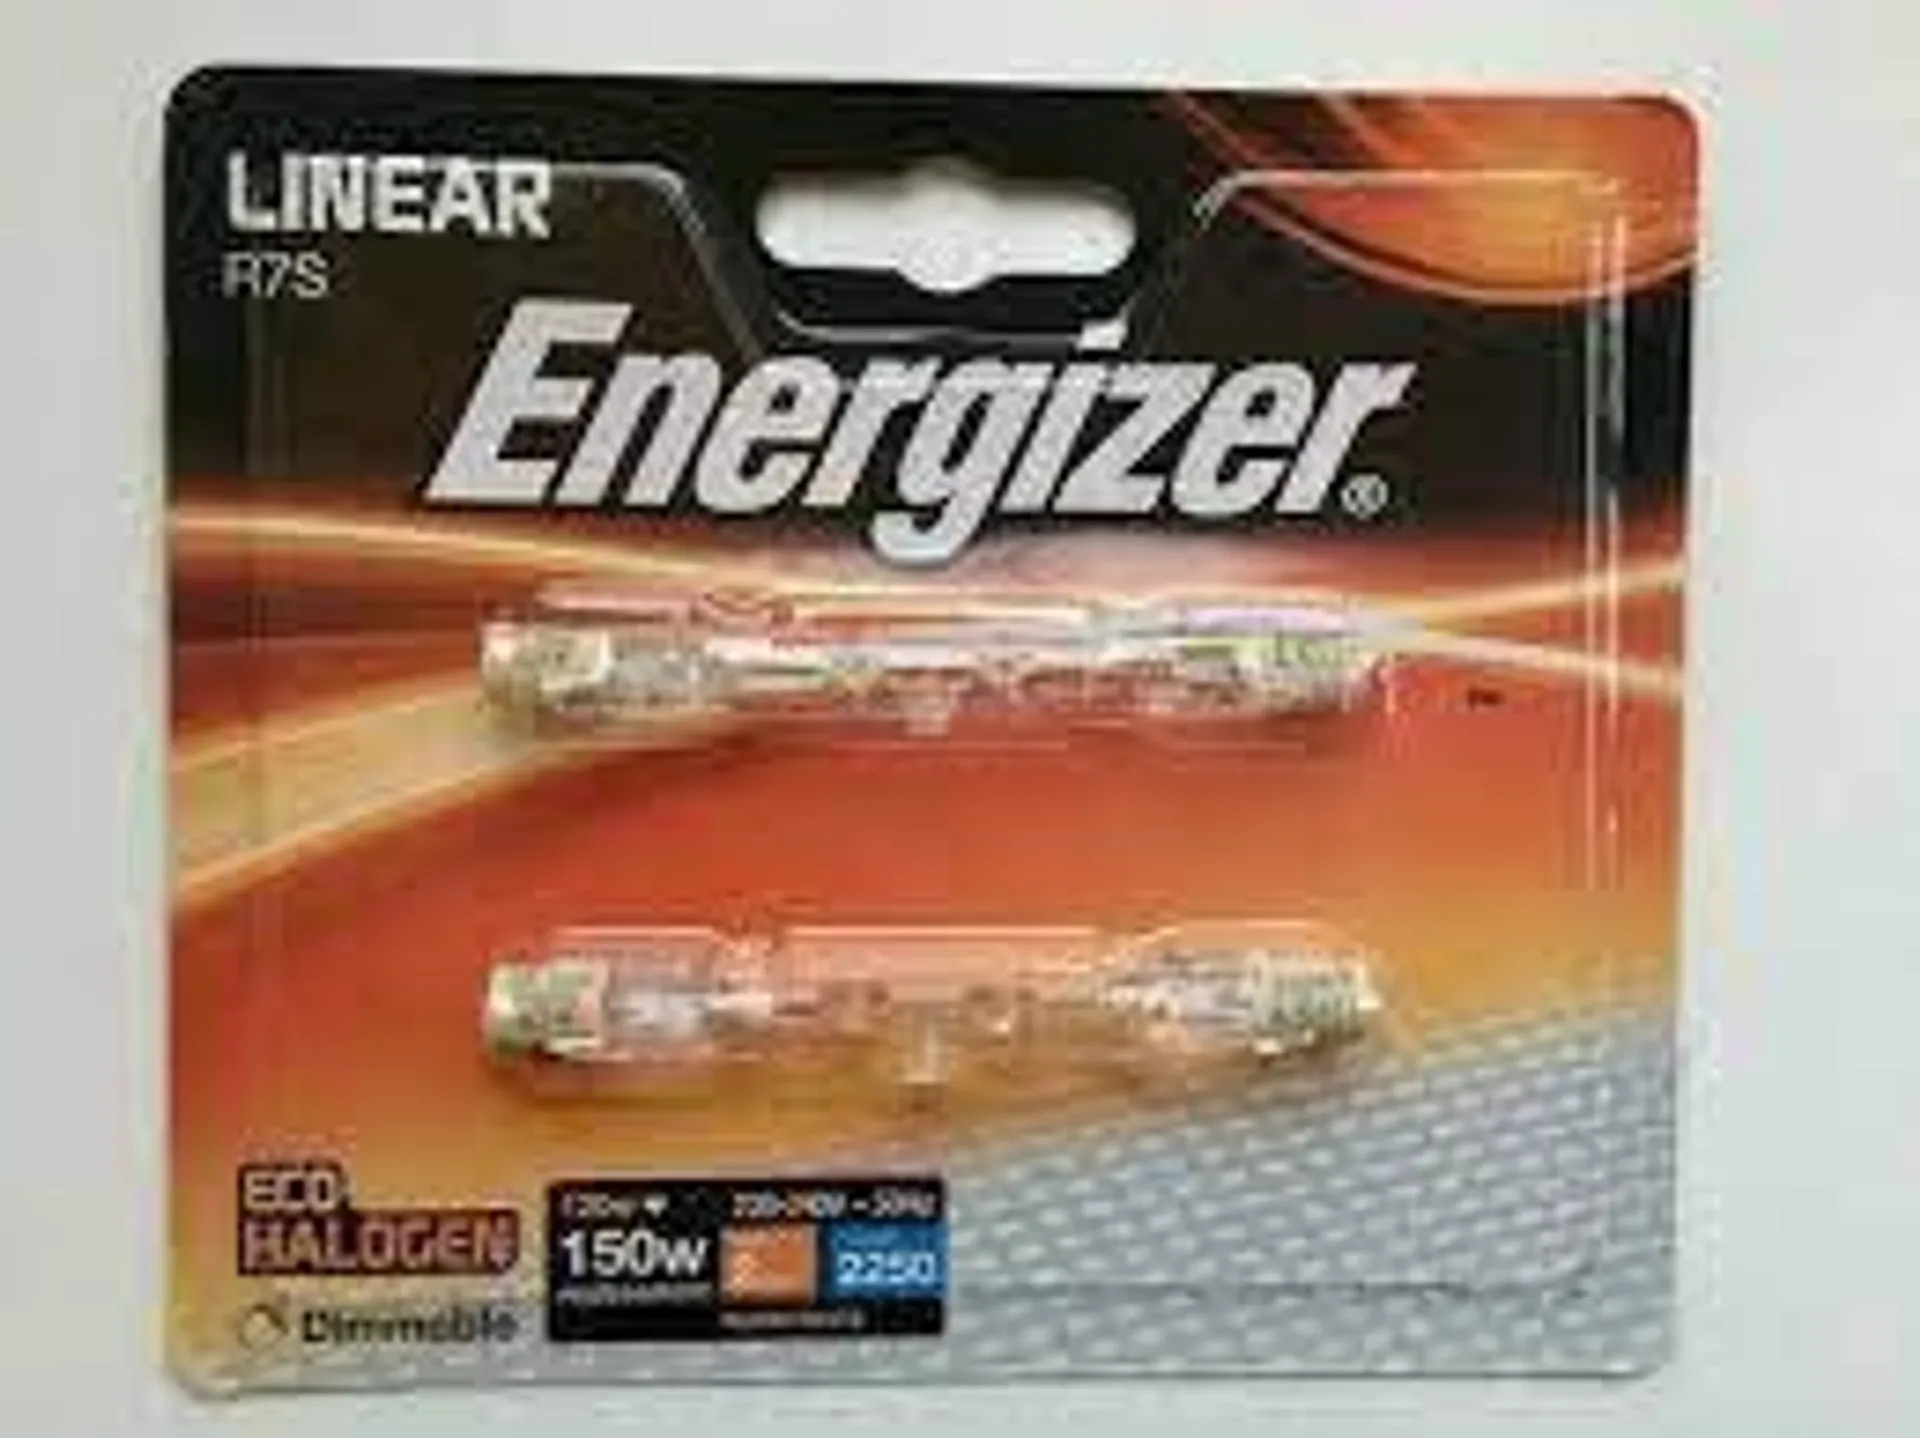 Energizer Halogen Linear 120w Dimmable R7S Bulbs